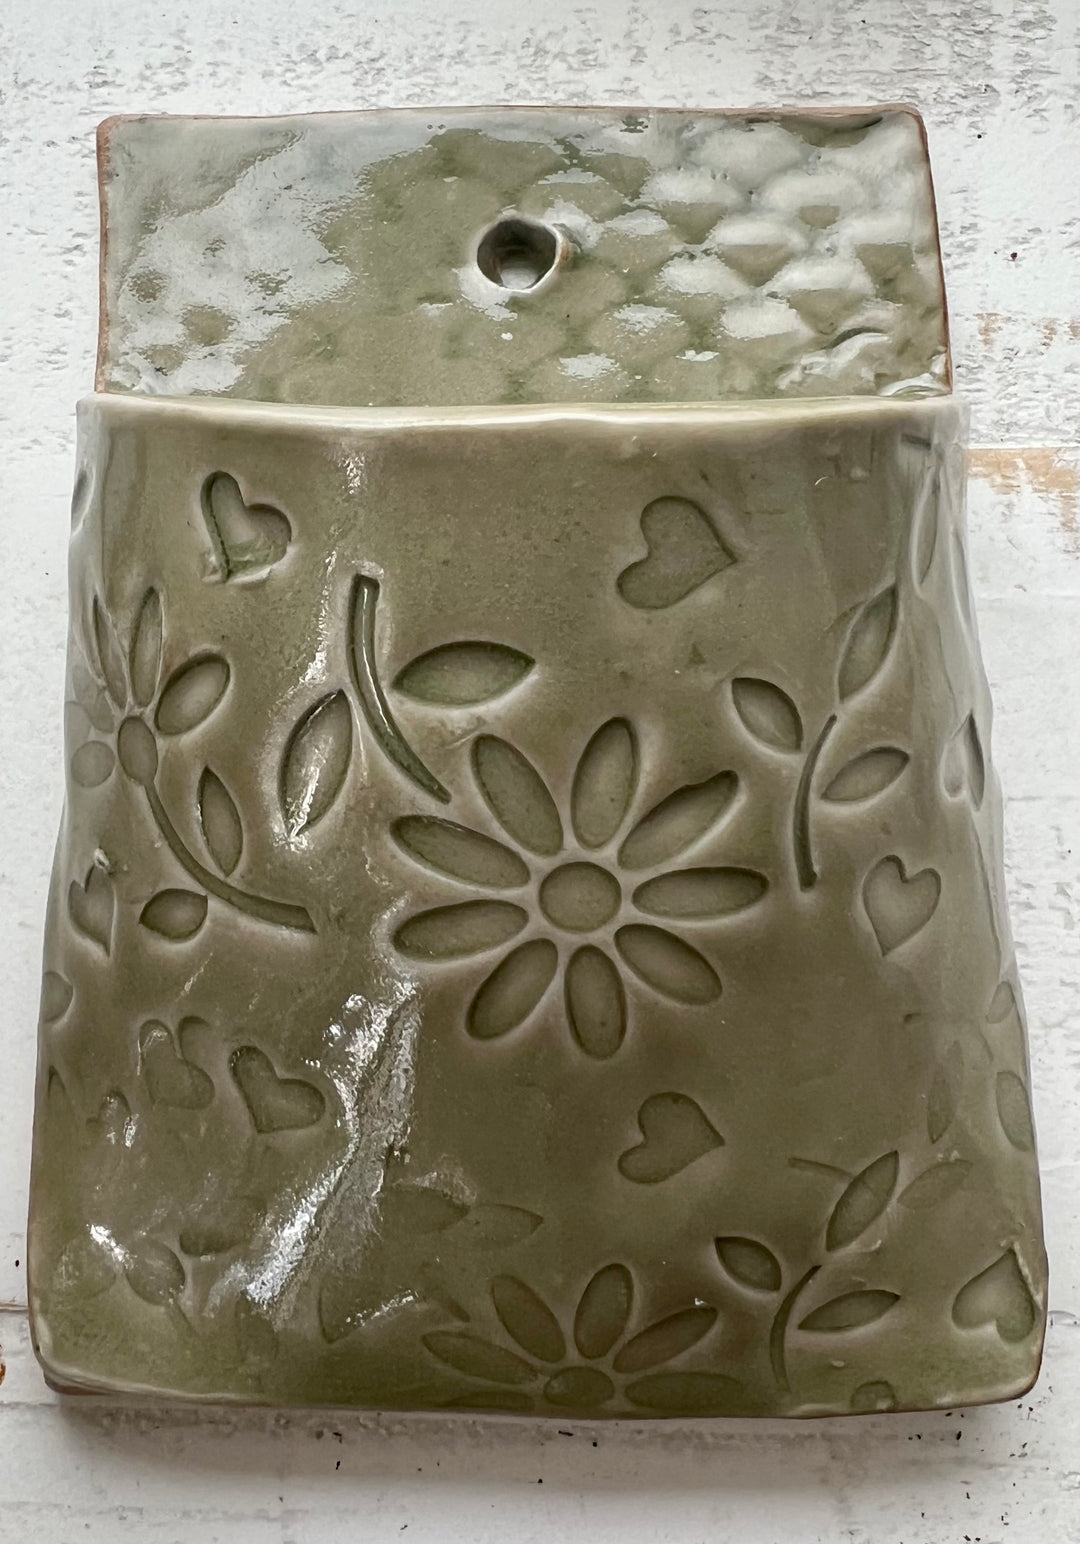 Handcrafted Garden Wall Vase with drainage